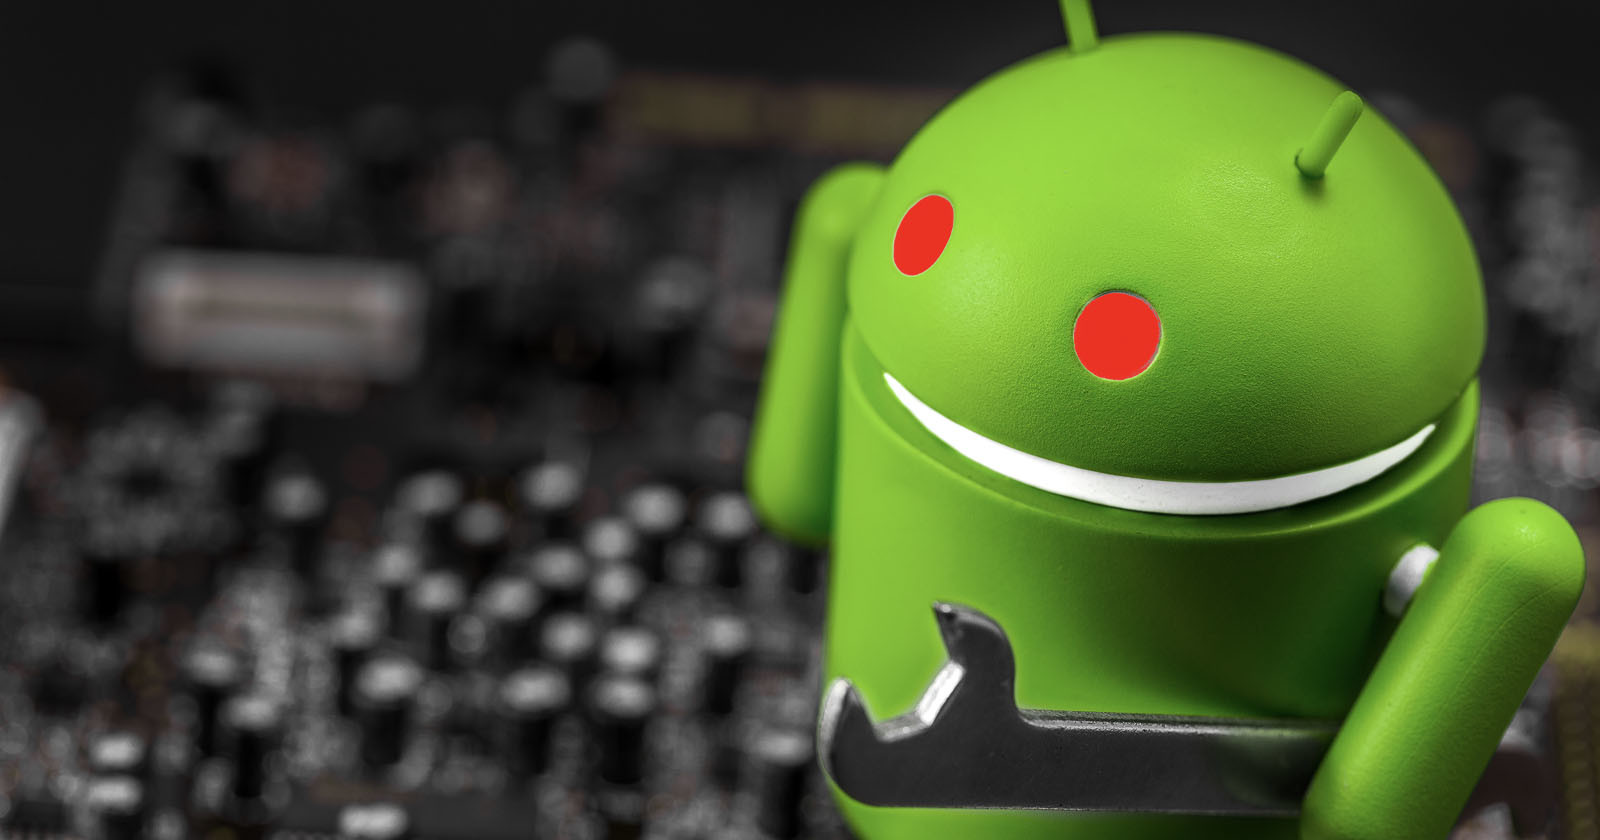  russian-linked android spyware takes control camera 